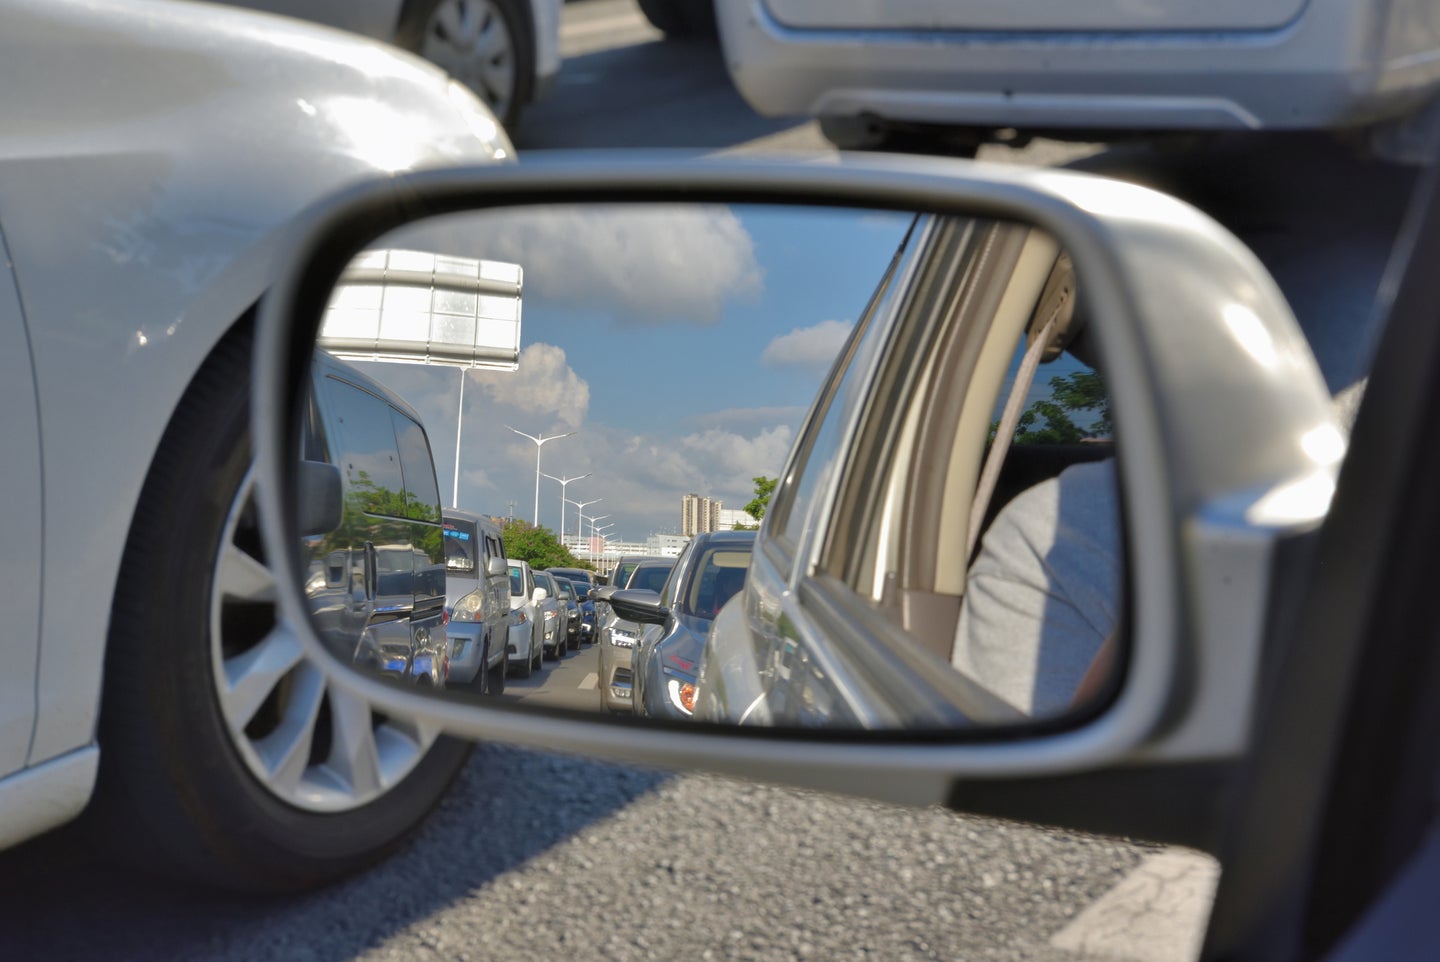 Best Side Mirror Covers for Cars: Protect Your Mirrors with These Top Picks